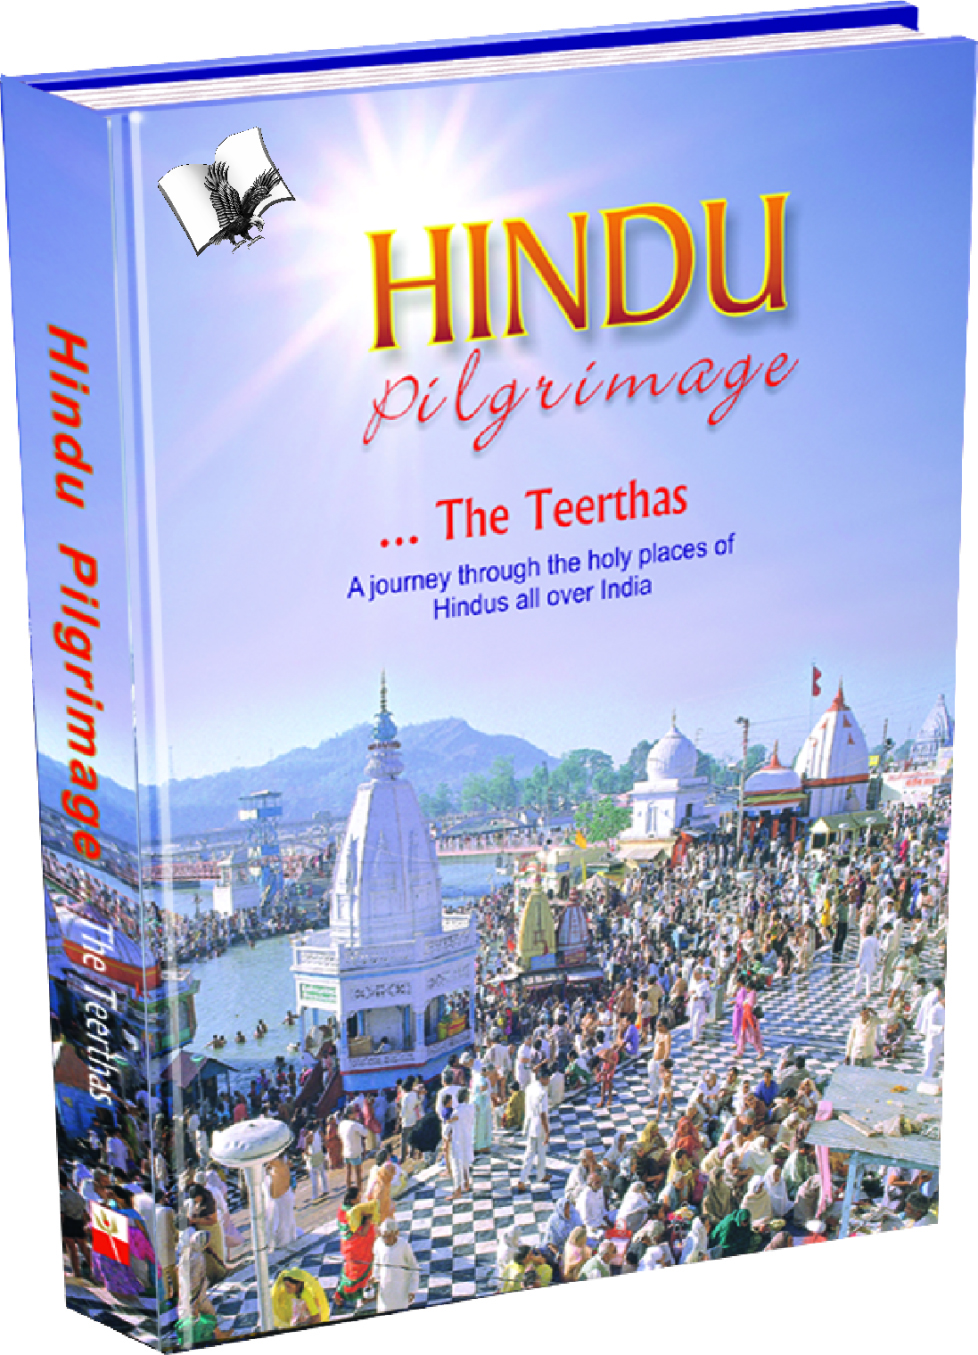 Hindu Pilgrimage-A journey through the holy places of Hindus all over India